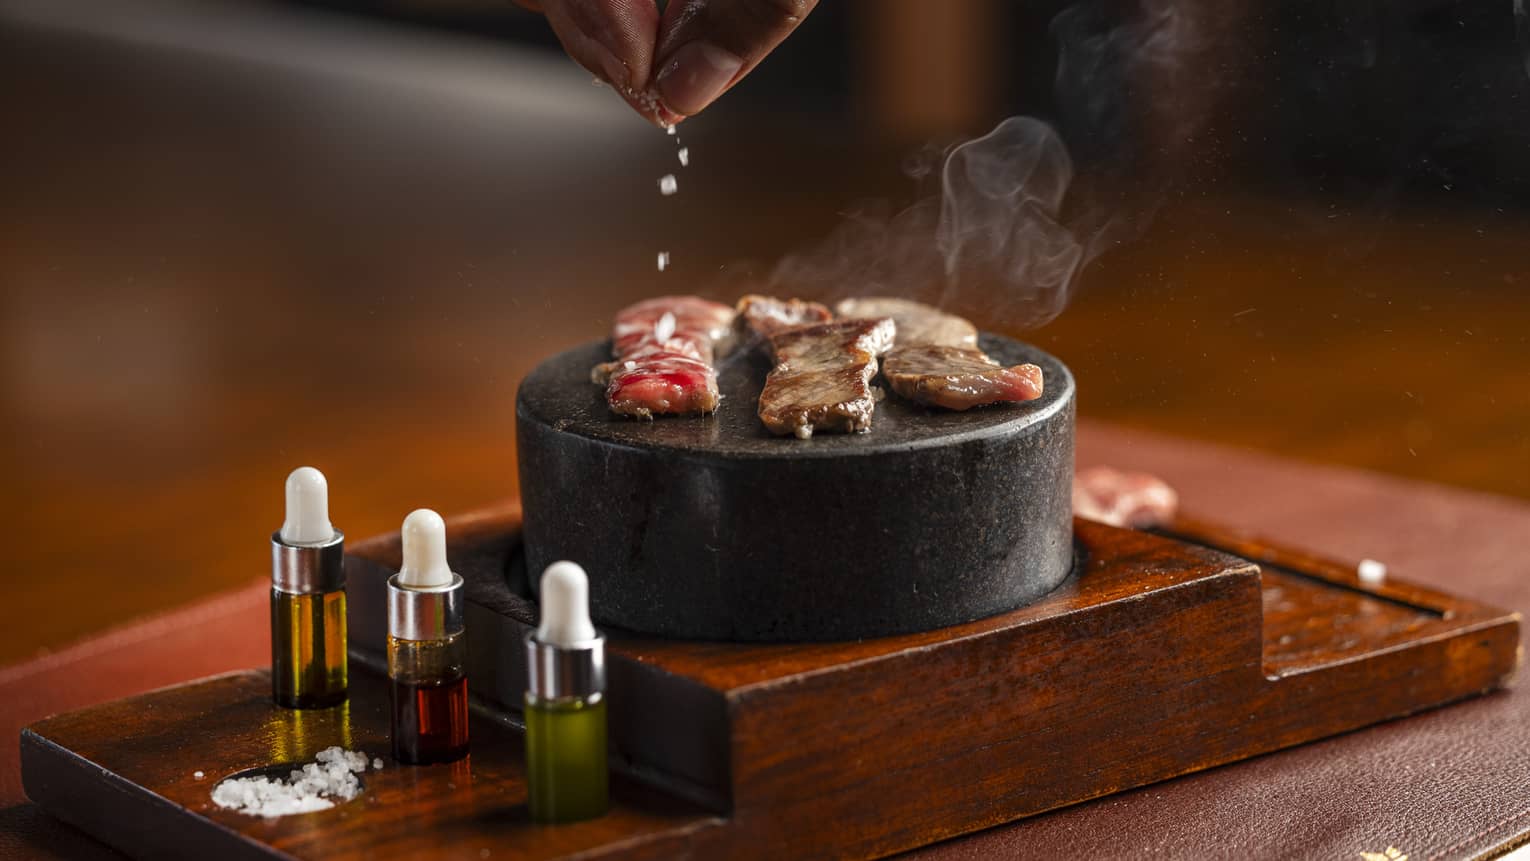 A hand sprinkles salt on small pieces of beef as they cook on a small, black table-top barbecue grill